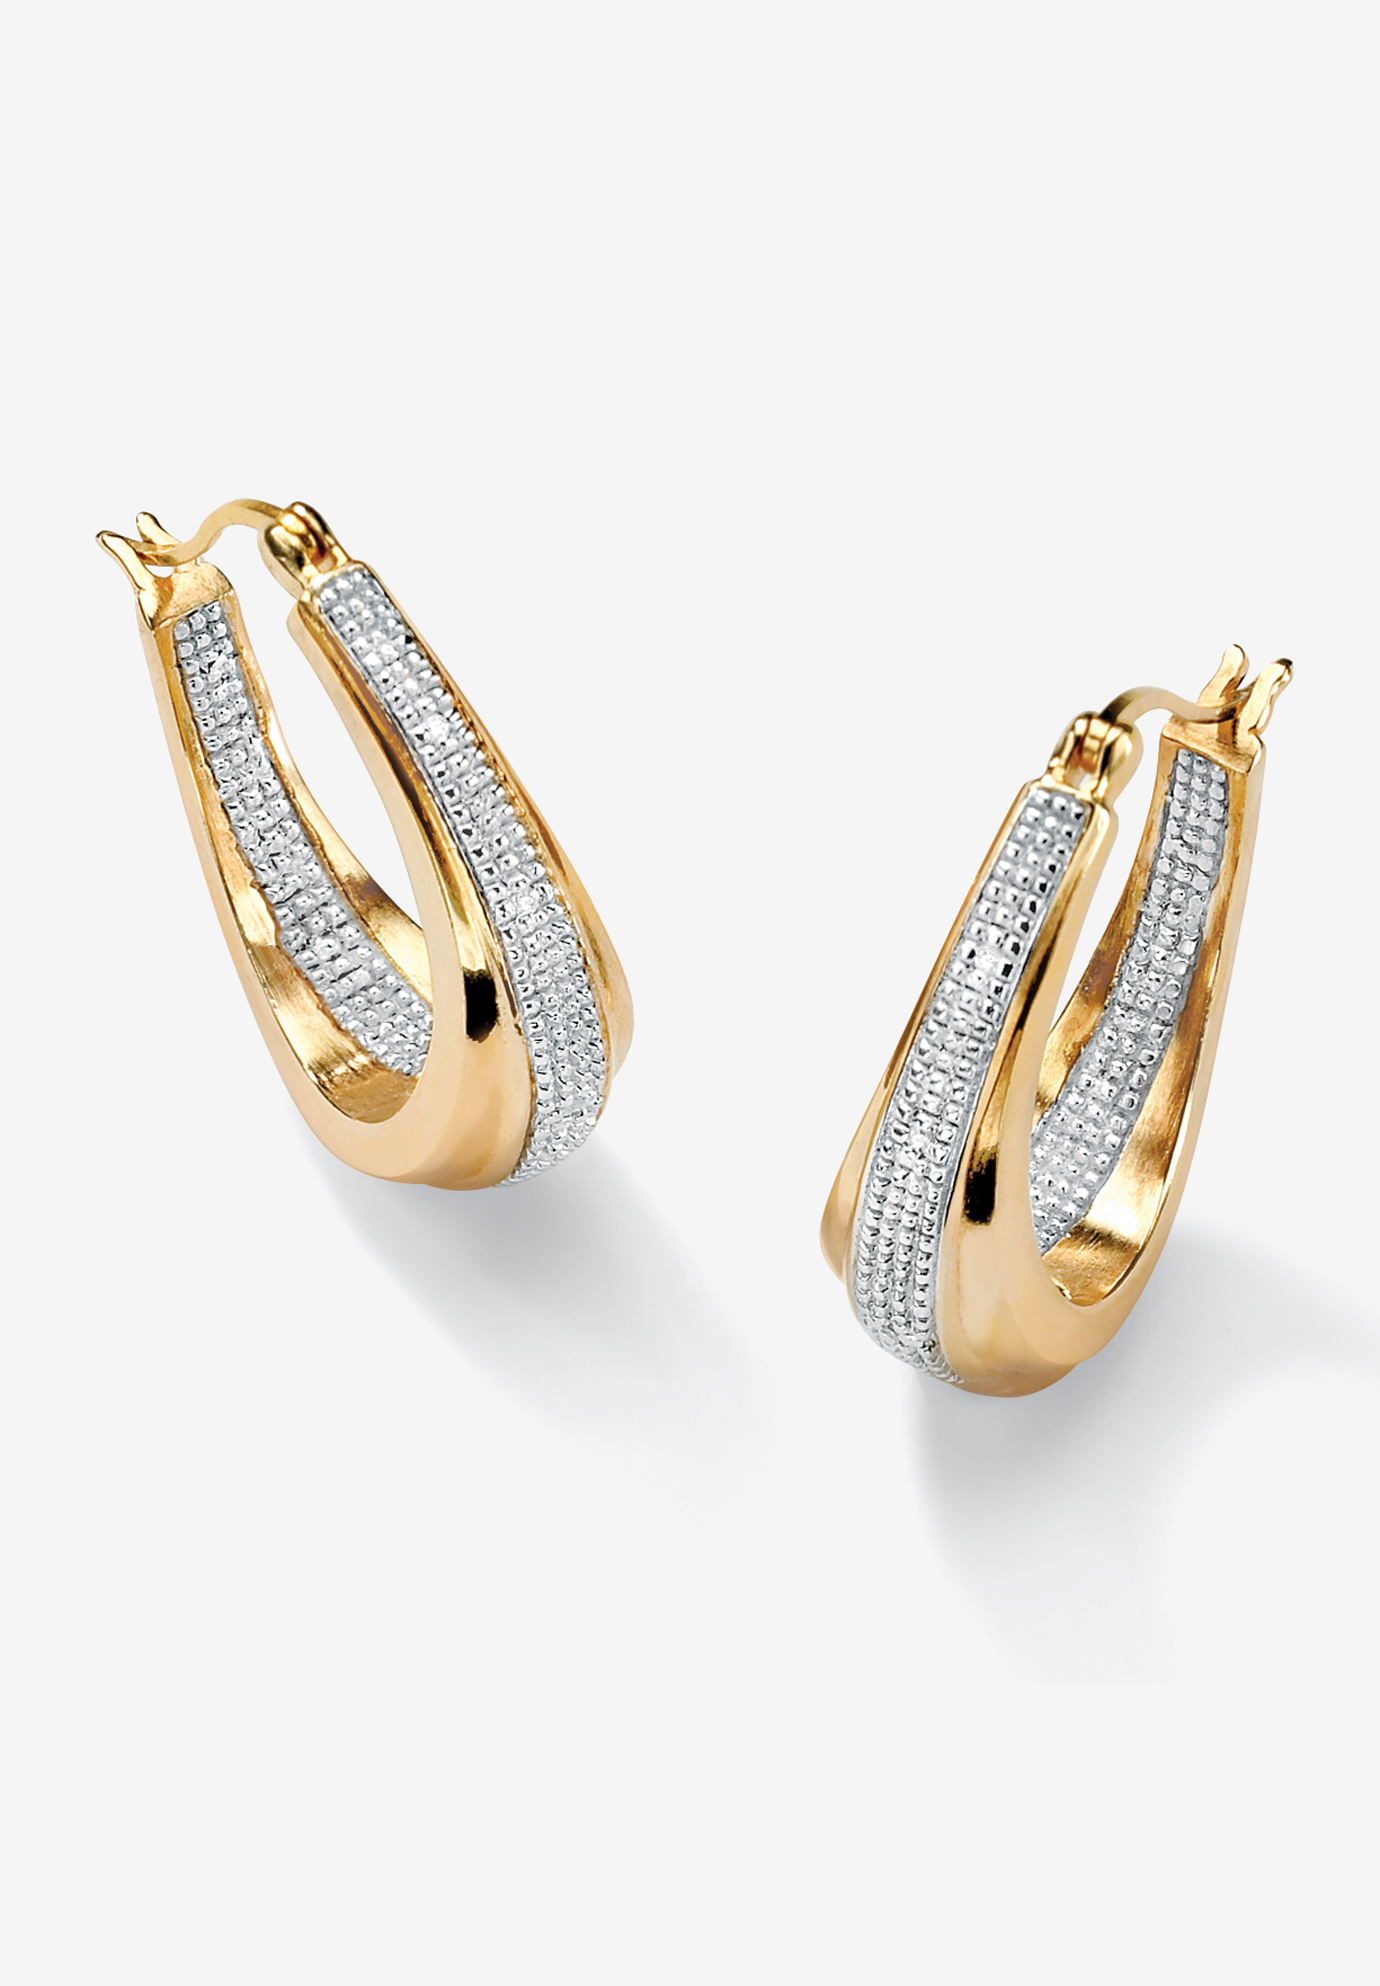 Gold Plated Hoop Earrings With Diamond Accent Roaman S